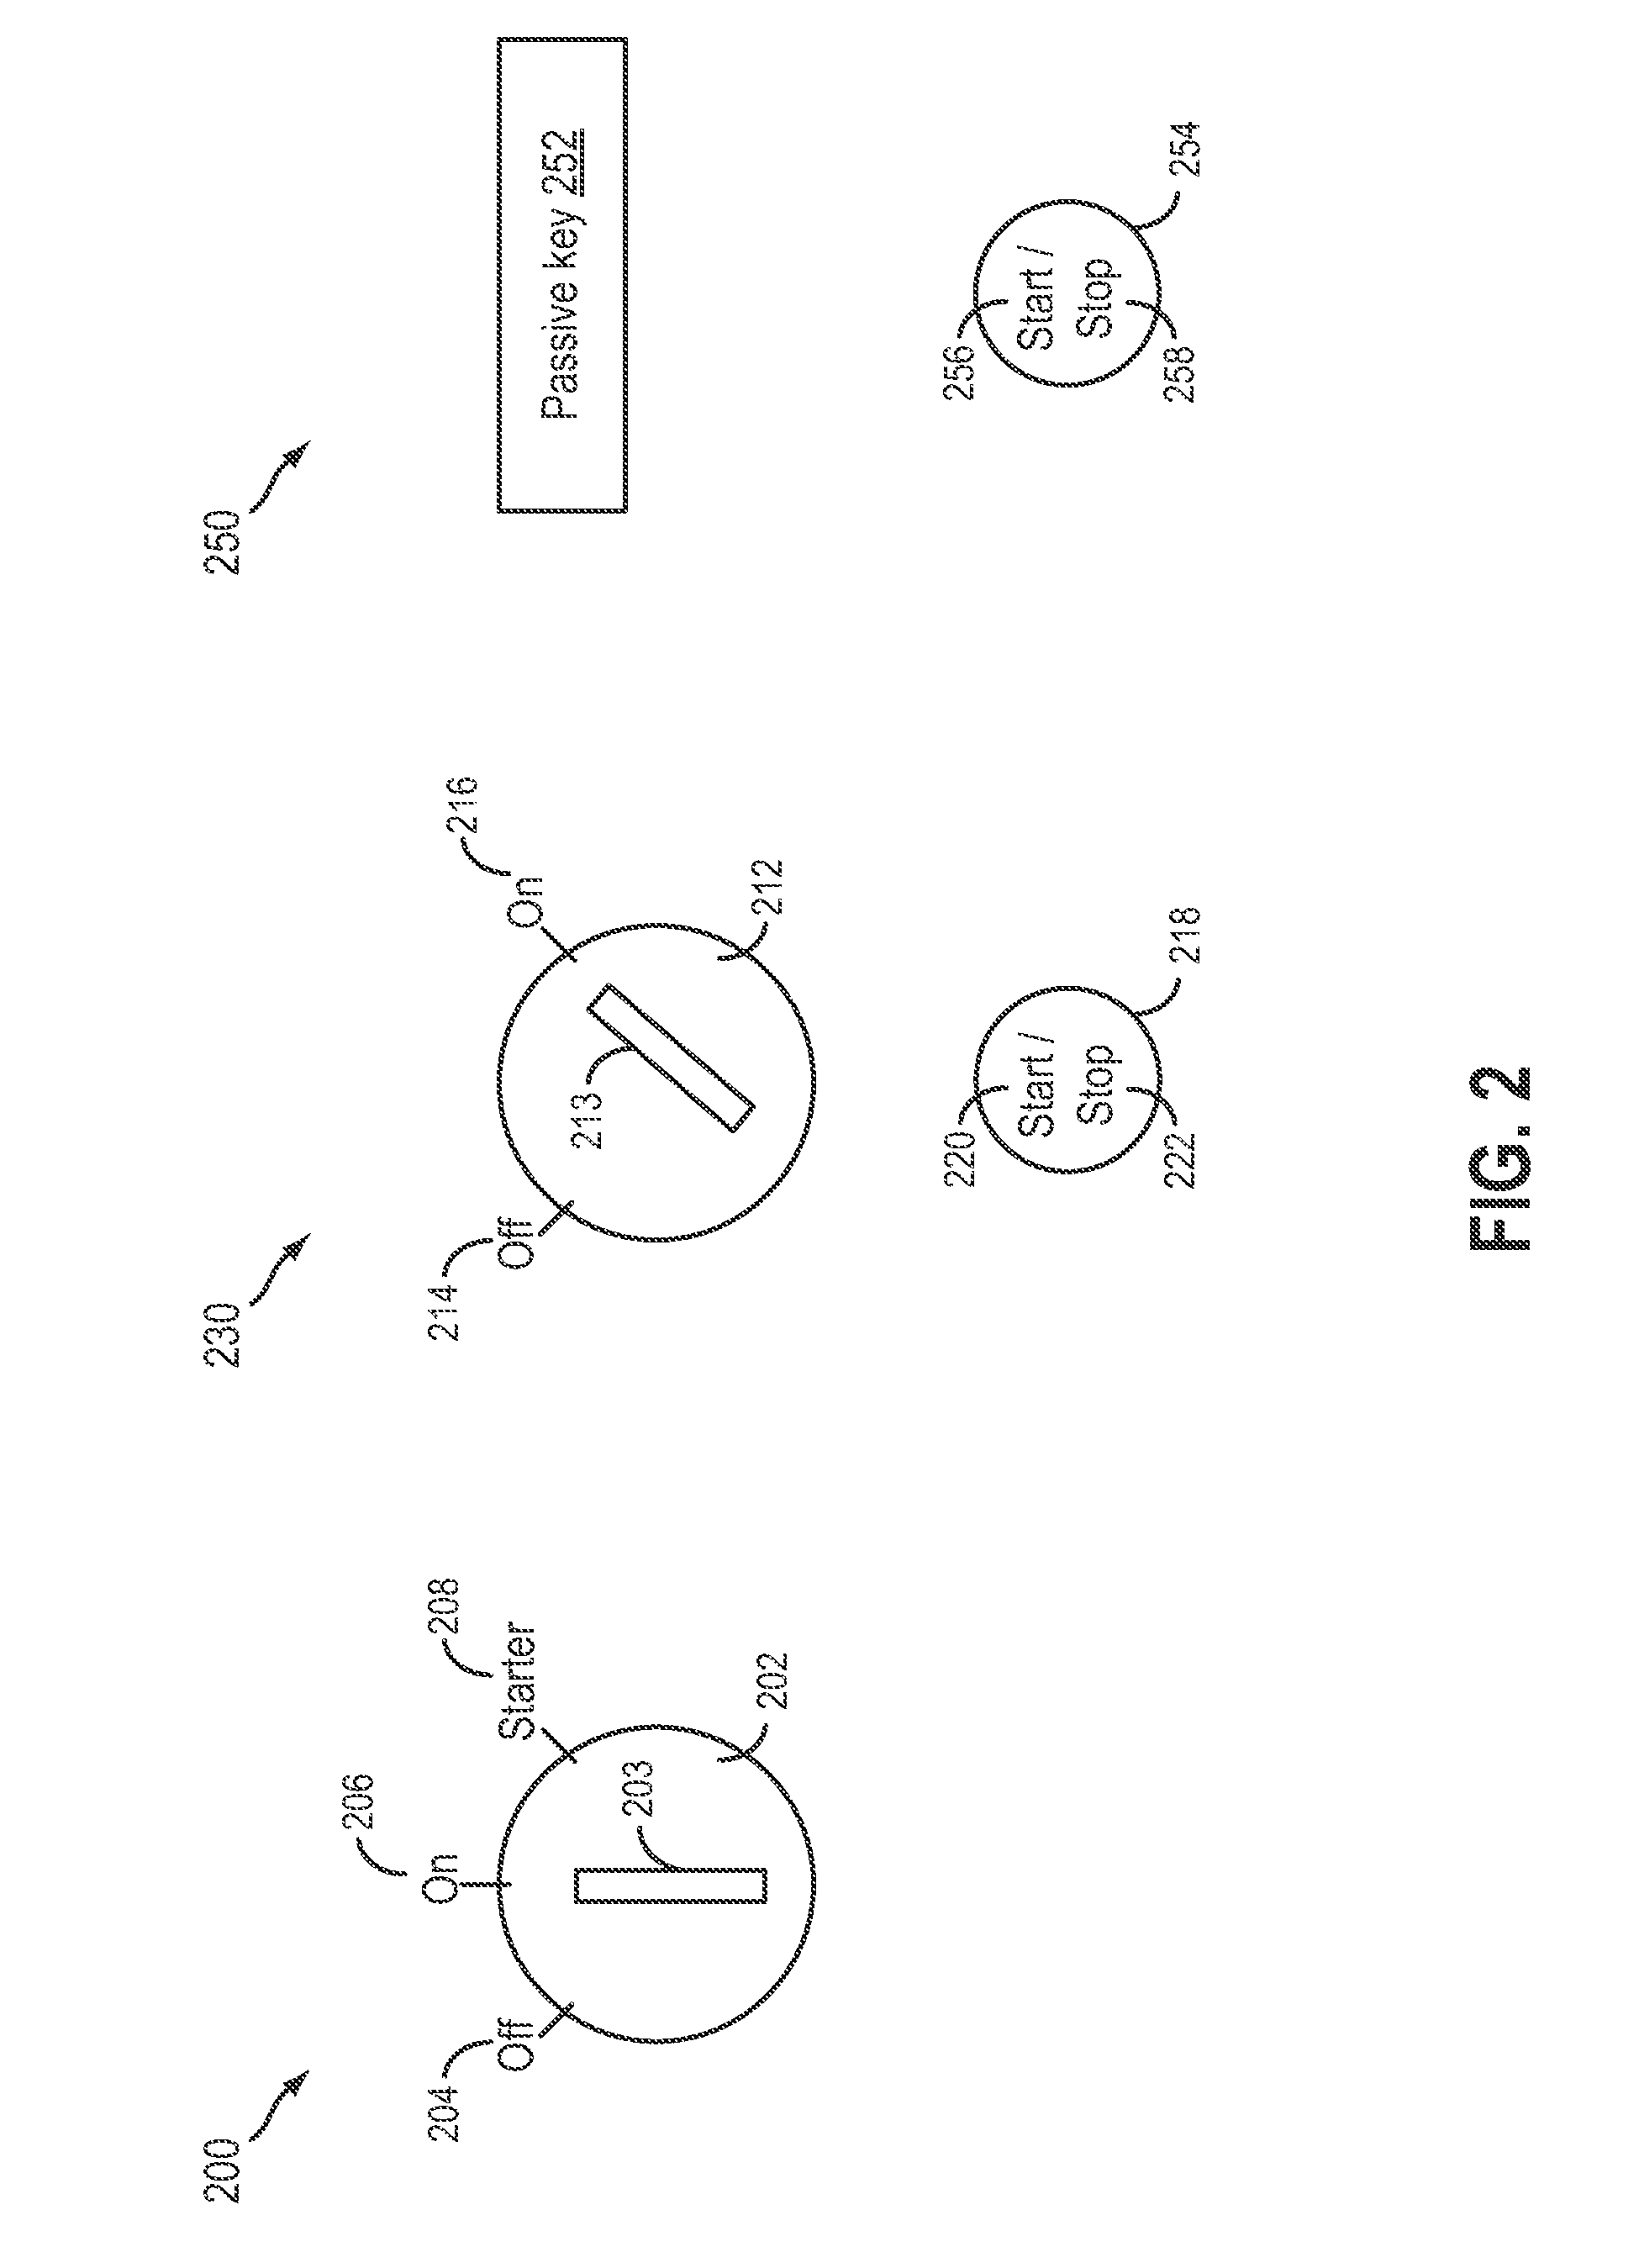 Method and system for inhibiting engine idle stop based on operating conditions